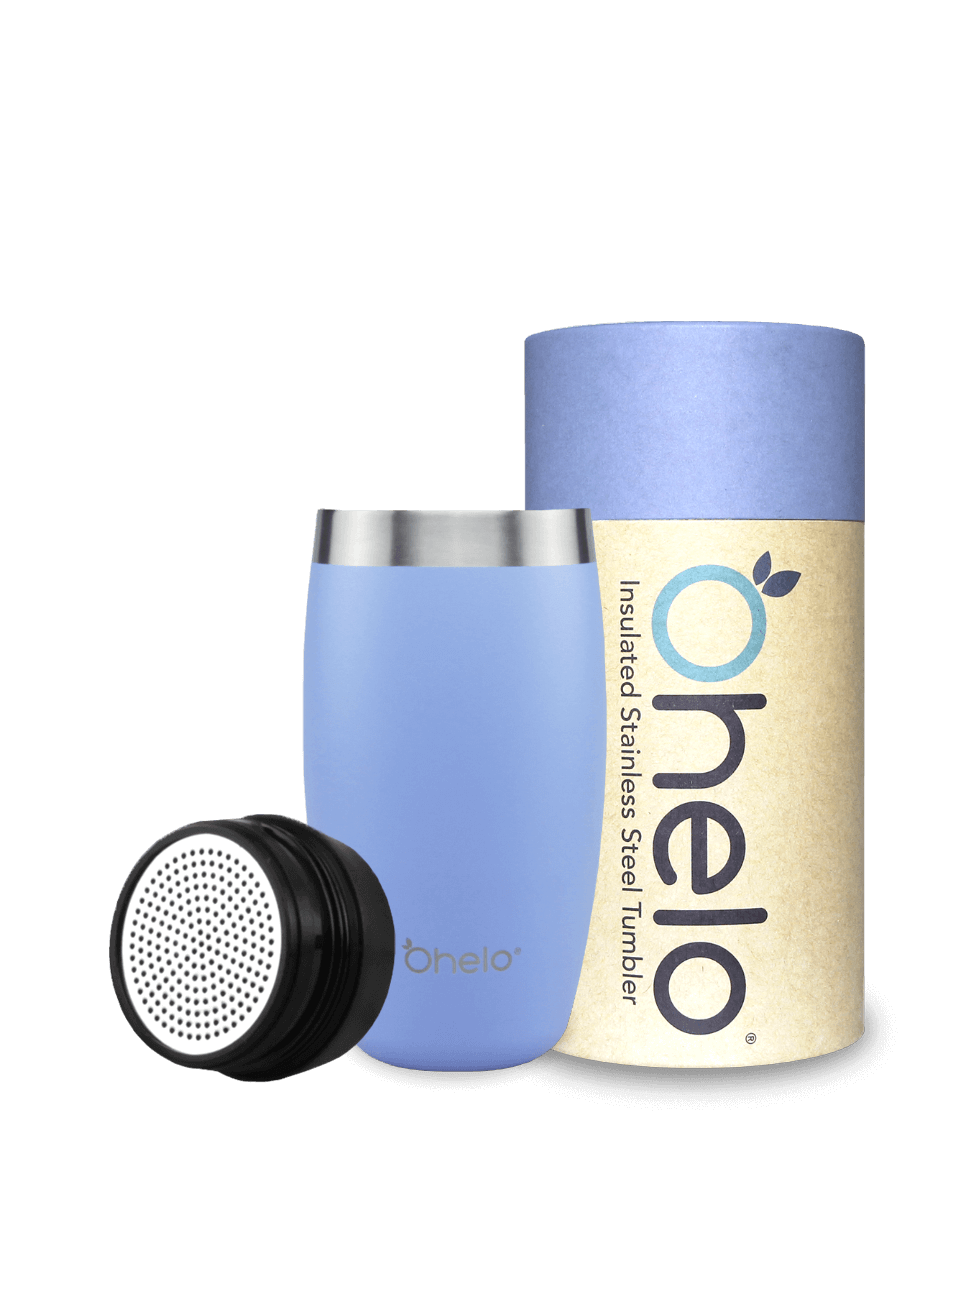 Ohelo dishwasher safe travel mug in blue with removable tea strainer and recycled packaging